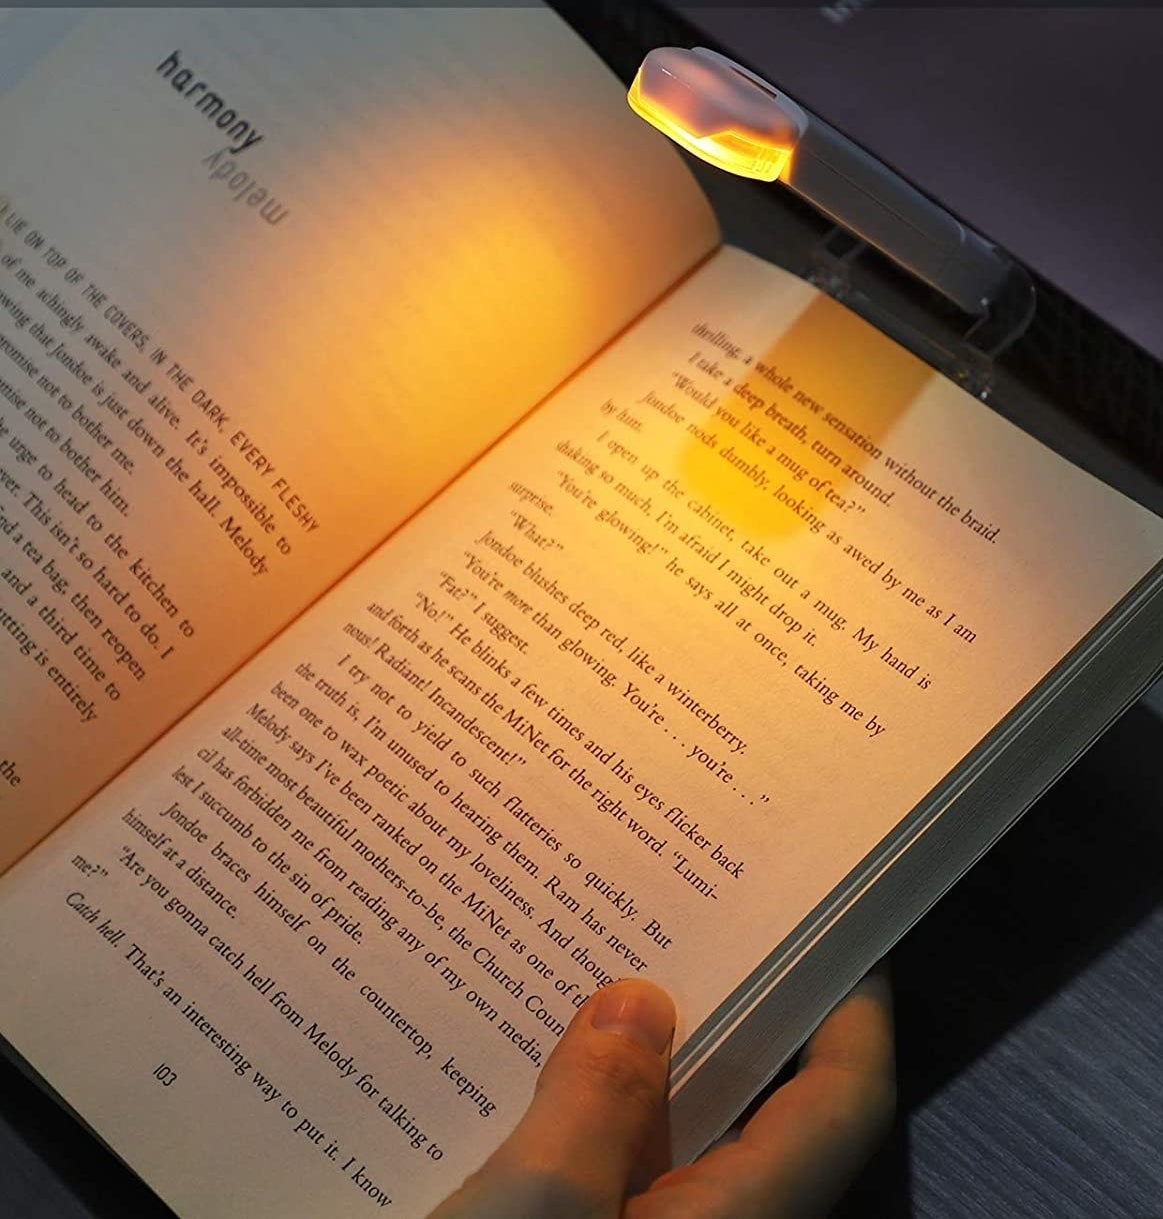 the book light shining soft warm light onto the pages of a book